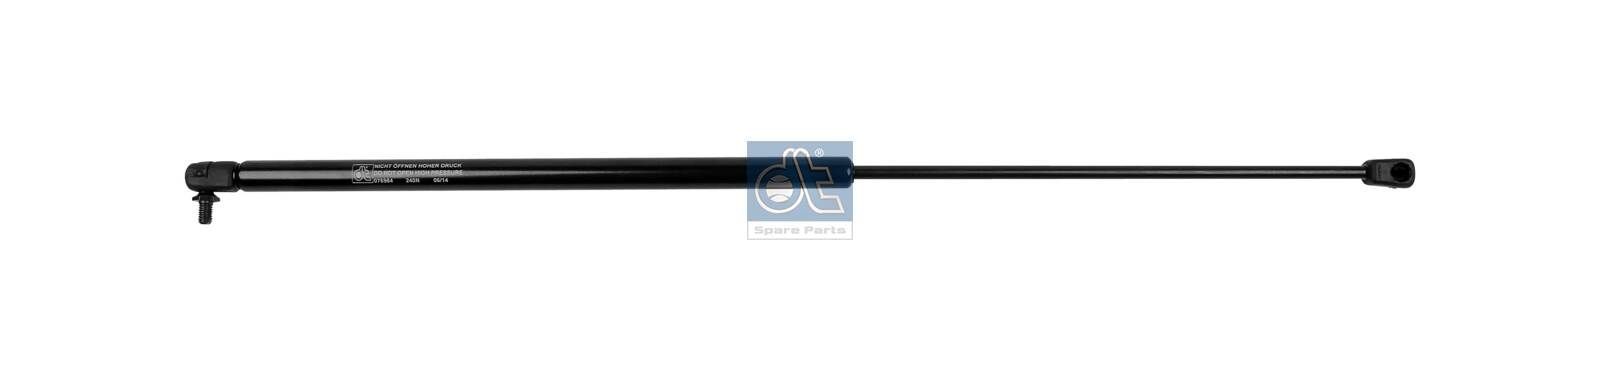 262685 DT Spare Parts 240N, 671 mm Gas Spring 5.64127 buy